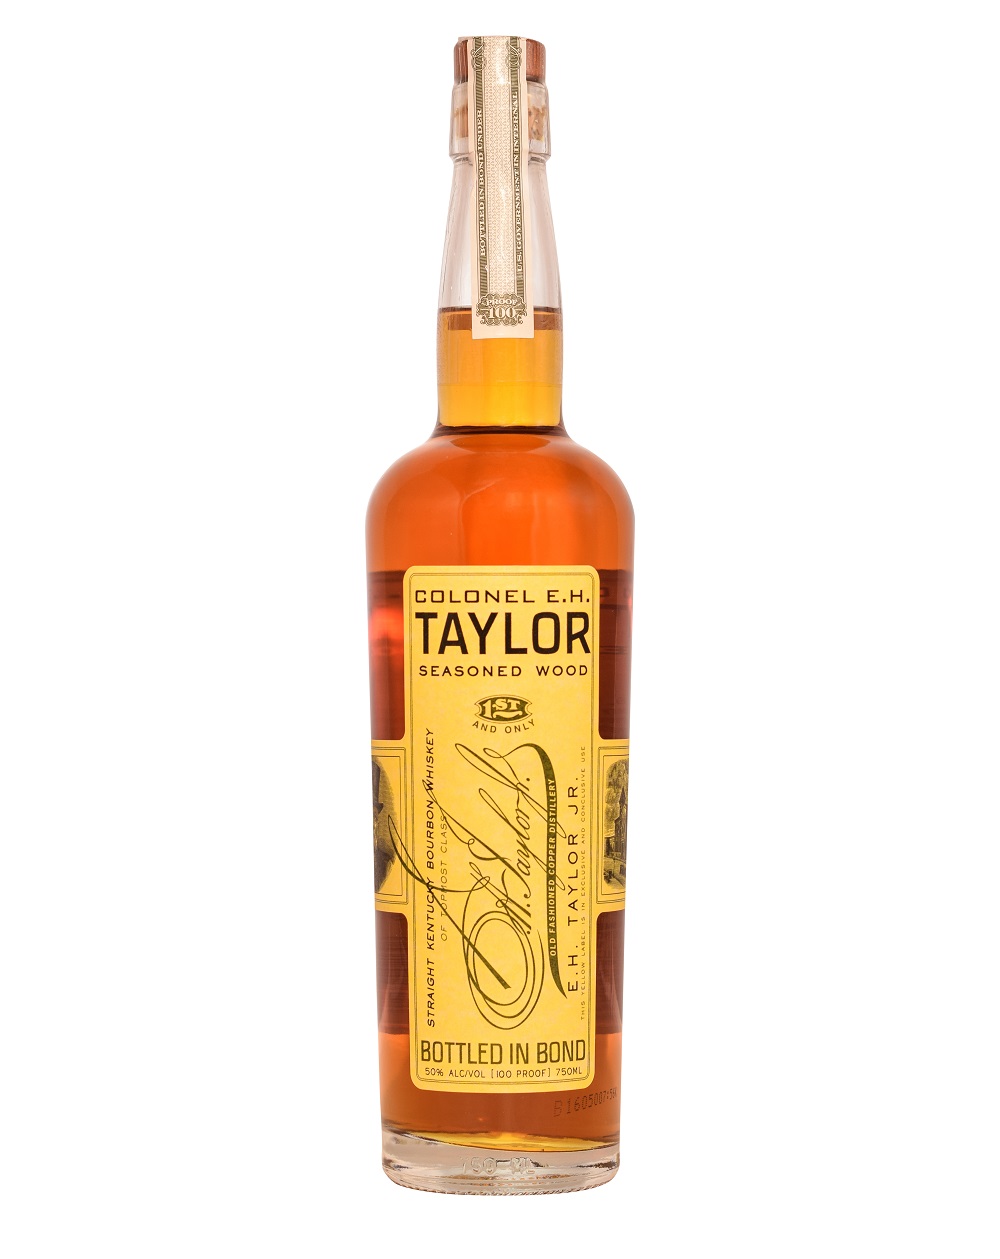 Colonel E.H. Taylor Seasoned Wood Musthave Malts